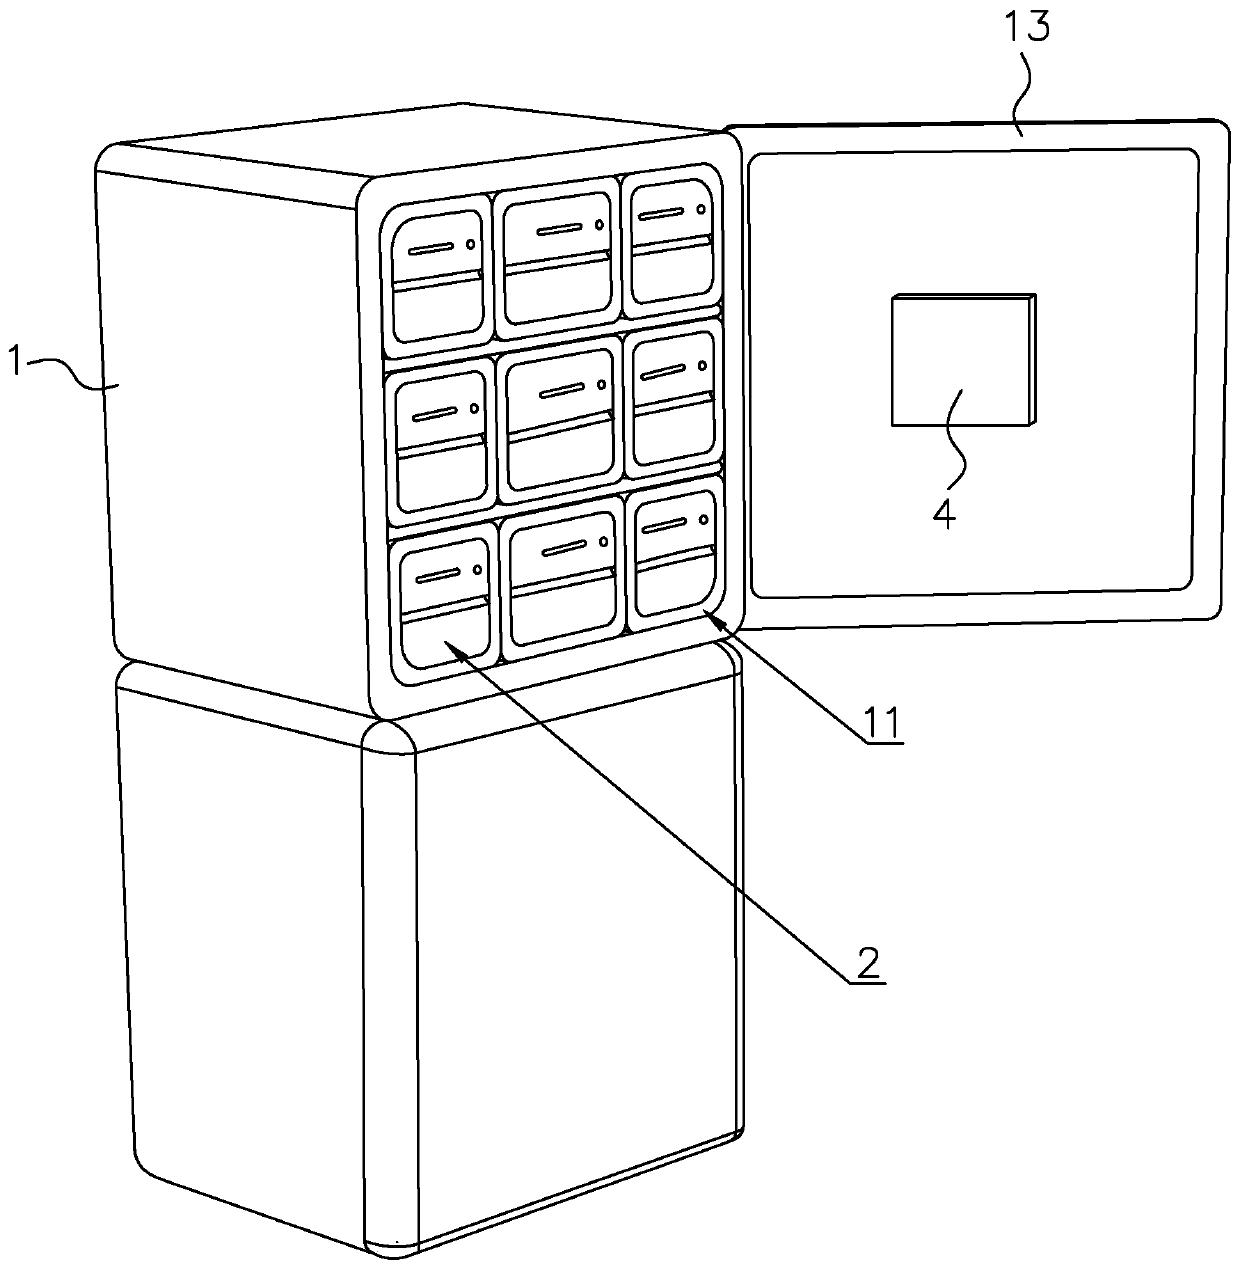 Intelligent health refrigerator capable of setting food access authority